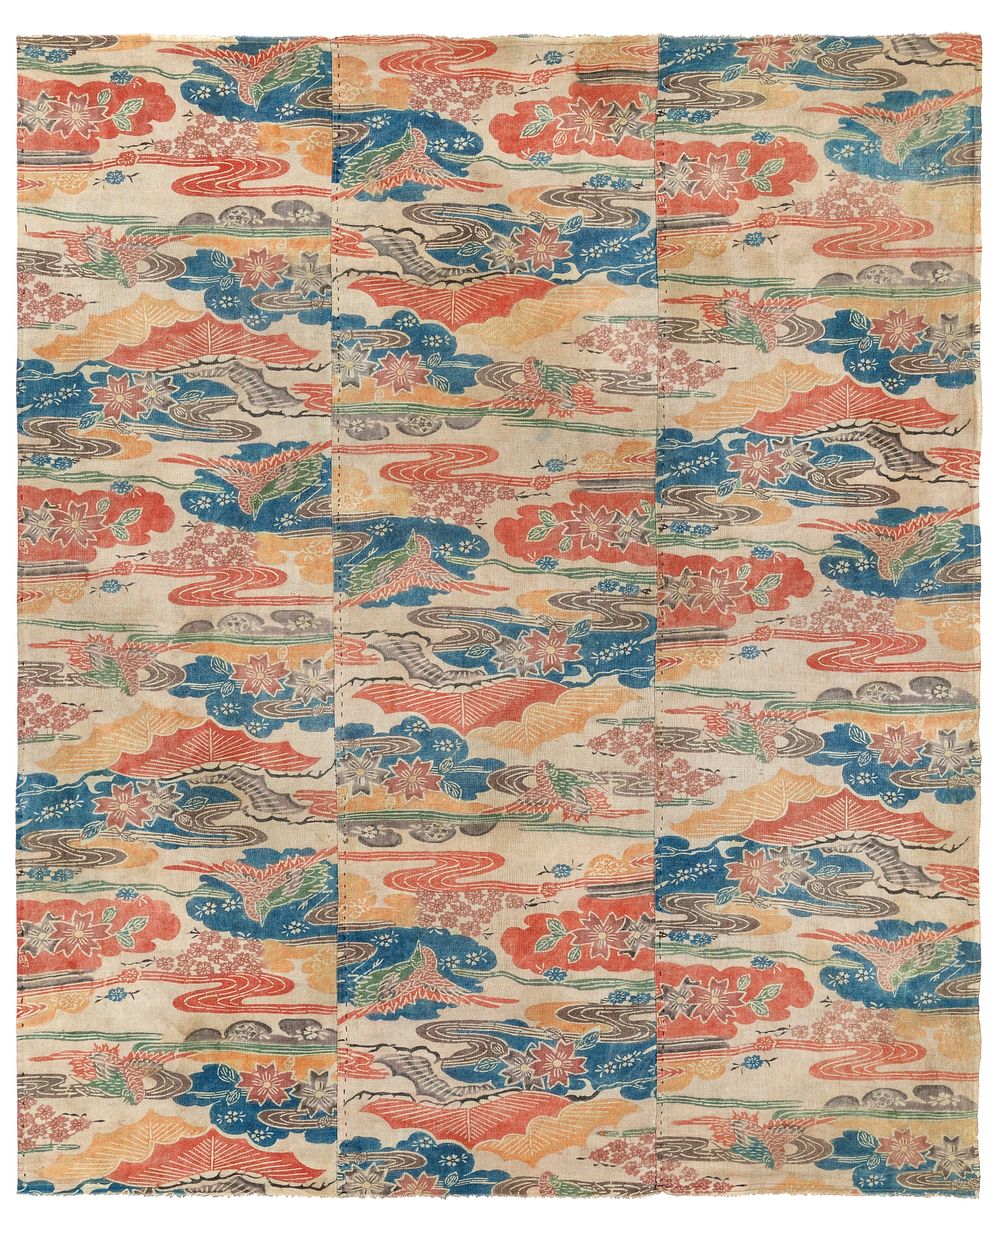 Three vertical patterned panels sewn together; red and green birds, blue water, and red, orange, green, and brown flowers.…